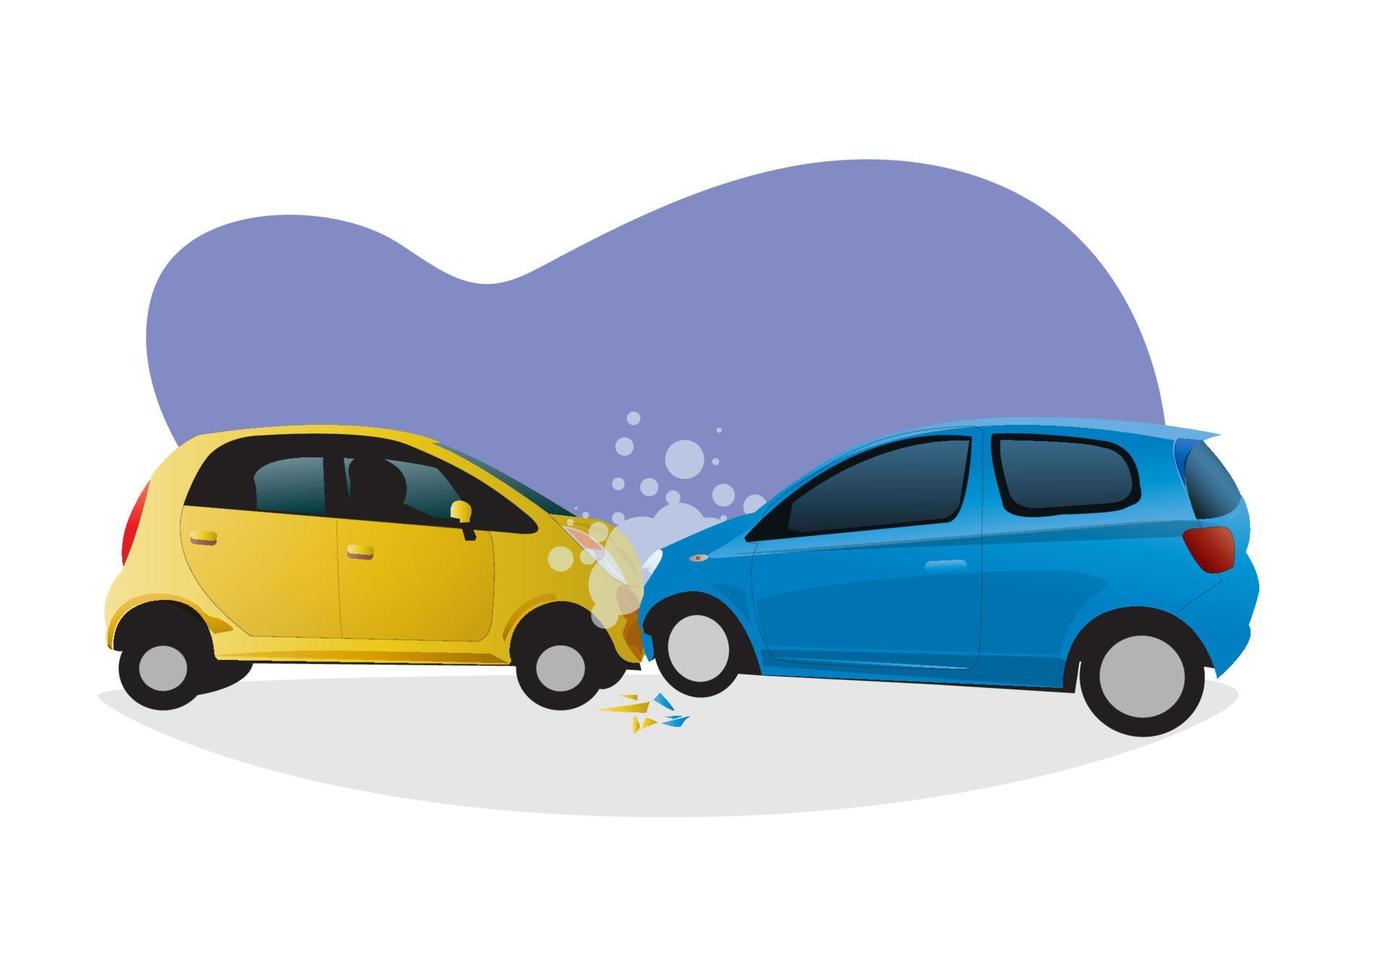 car accident Two cars collided, causing smoke and damage to the front of the car. Flat style cartoon illustration vector